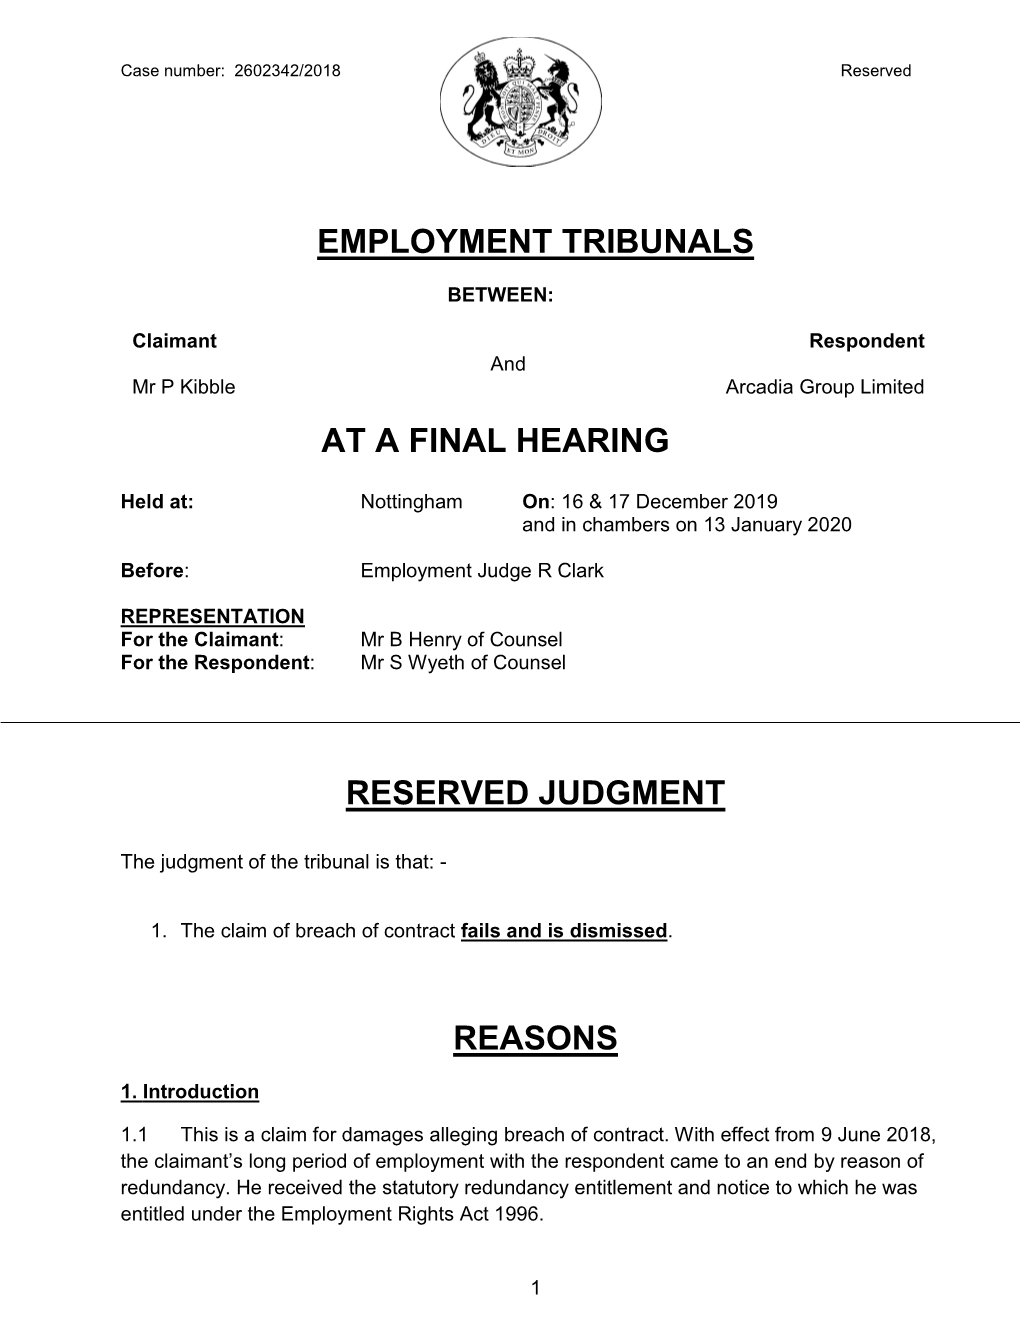 Employment Tribunals at a Final Hearing Reserved